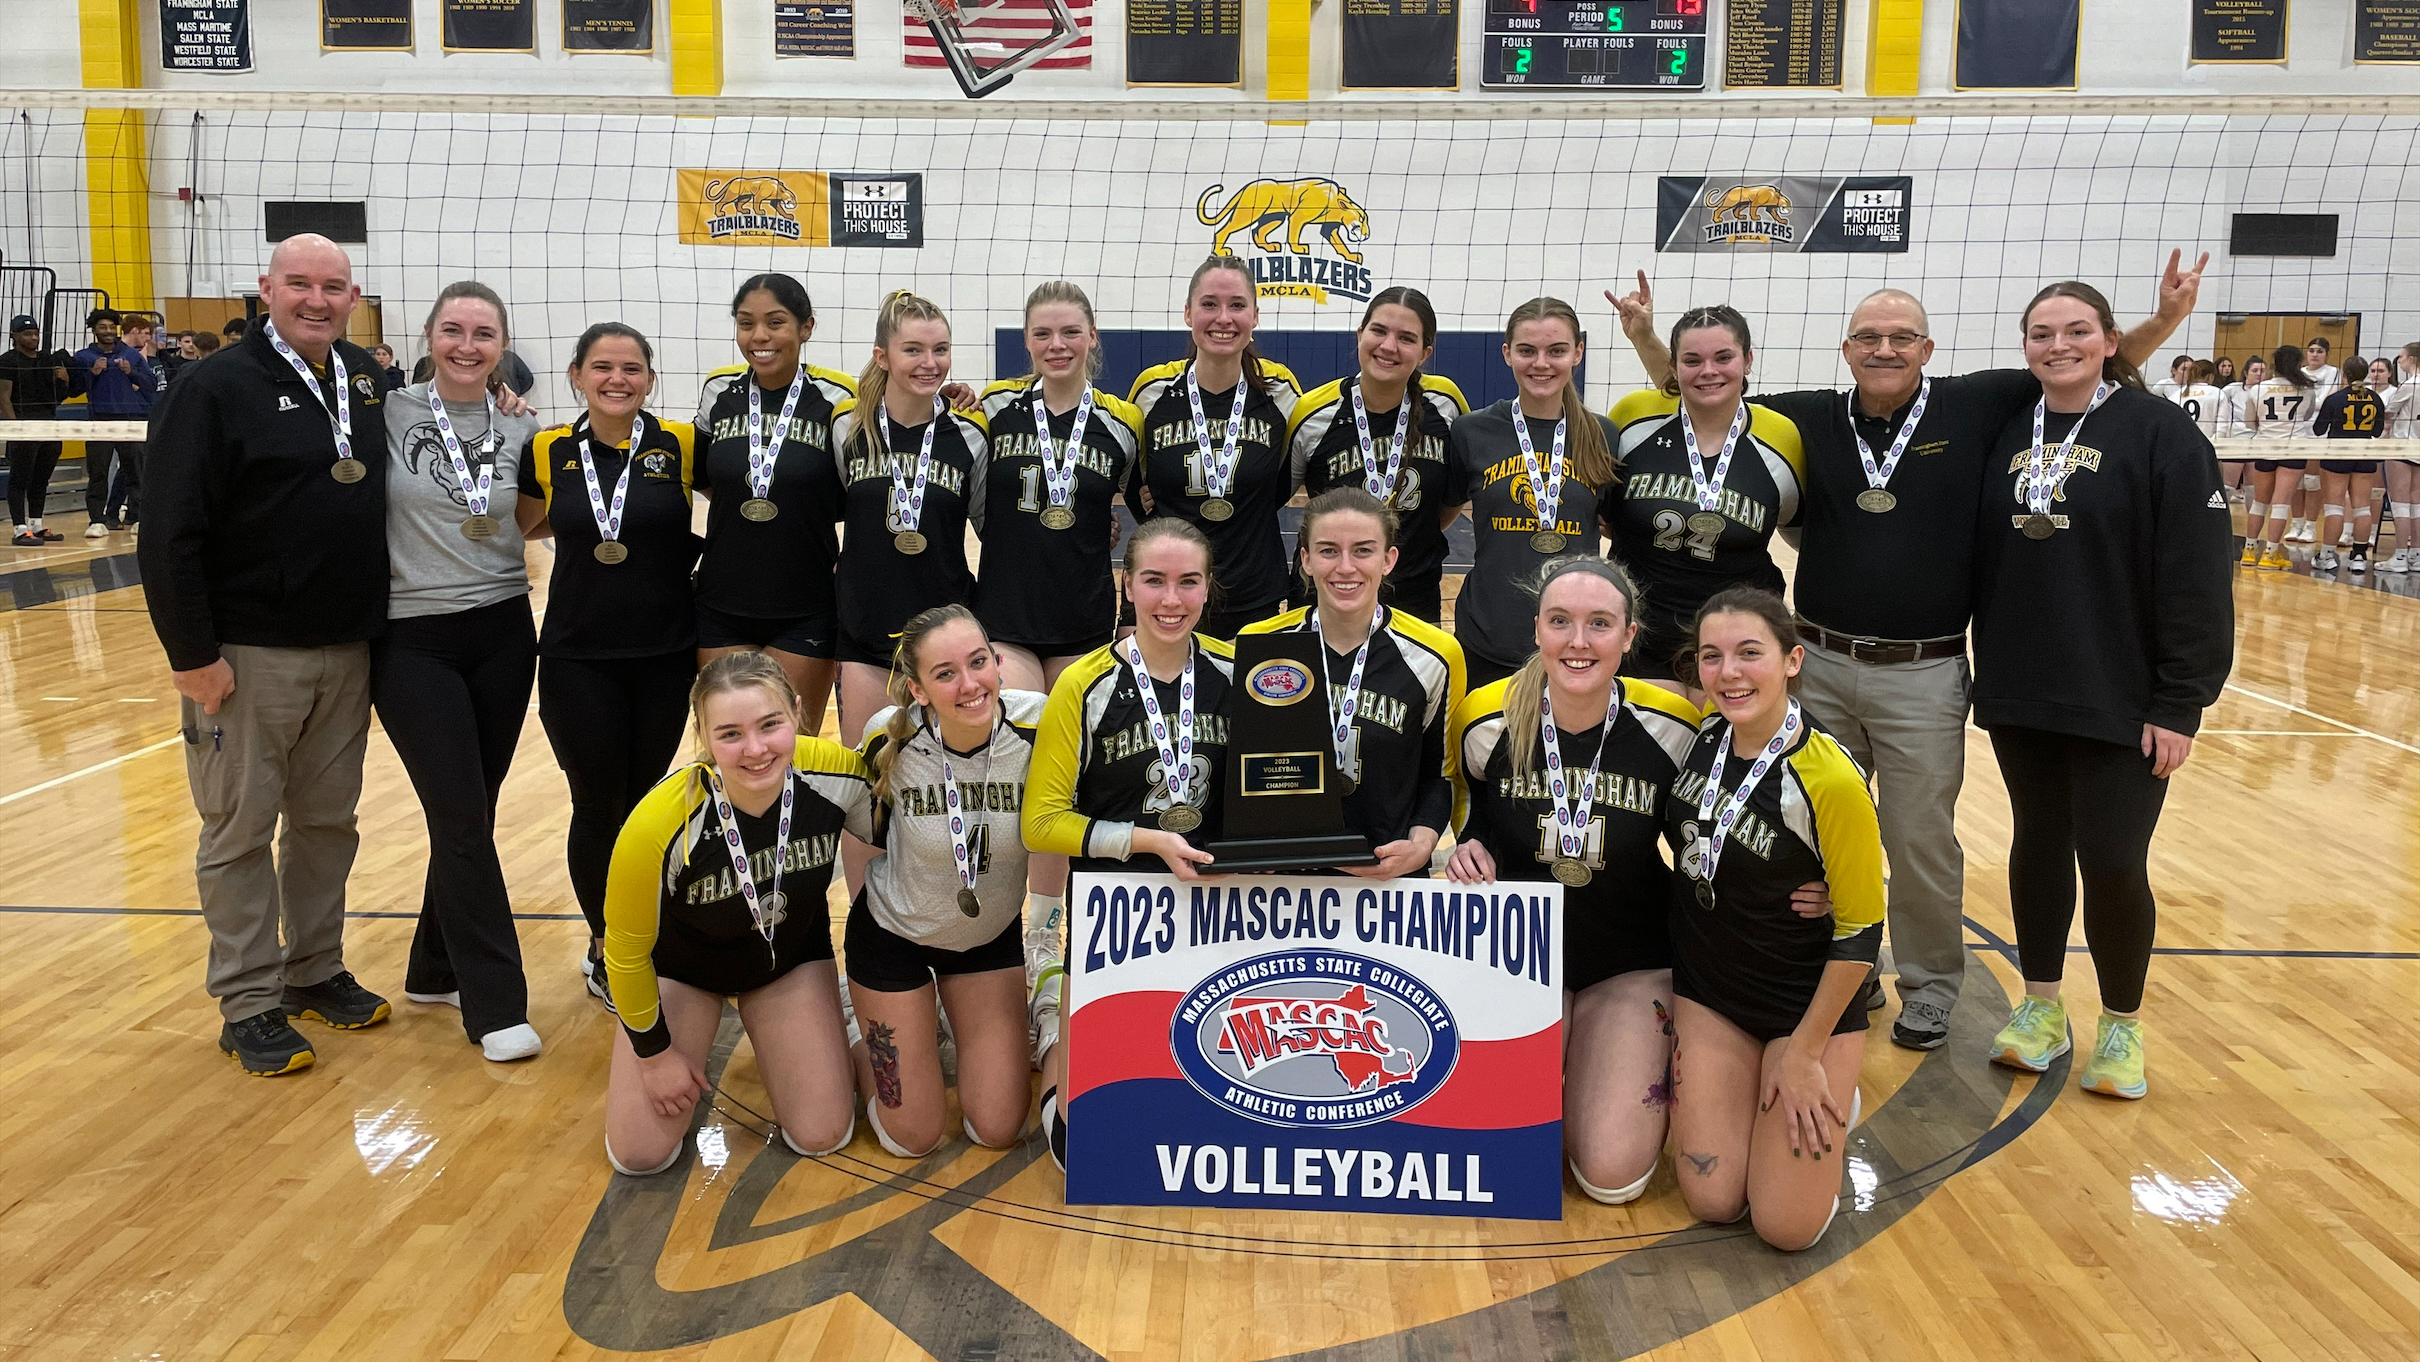 Volleyball Captures 2023 MASCAC Tournament Title with 3-2 Victory over MCLA